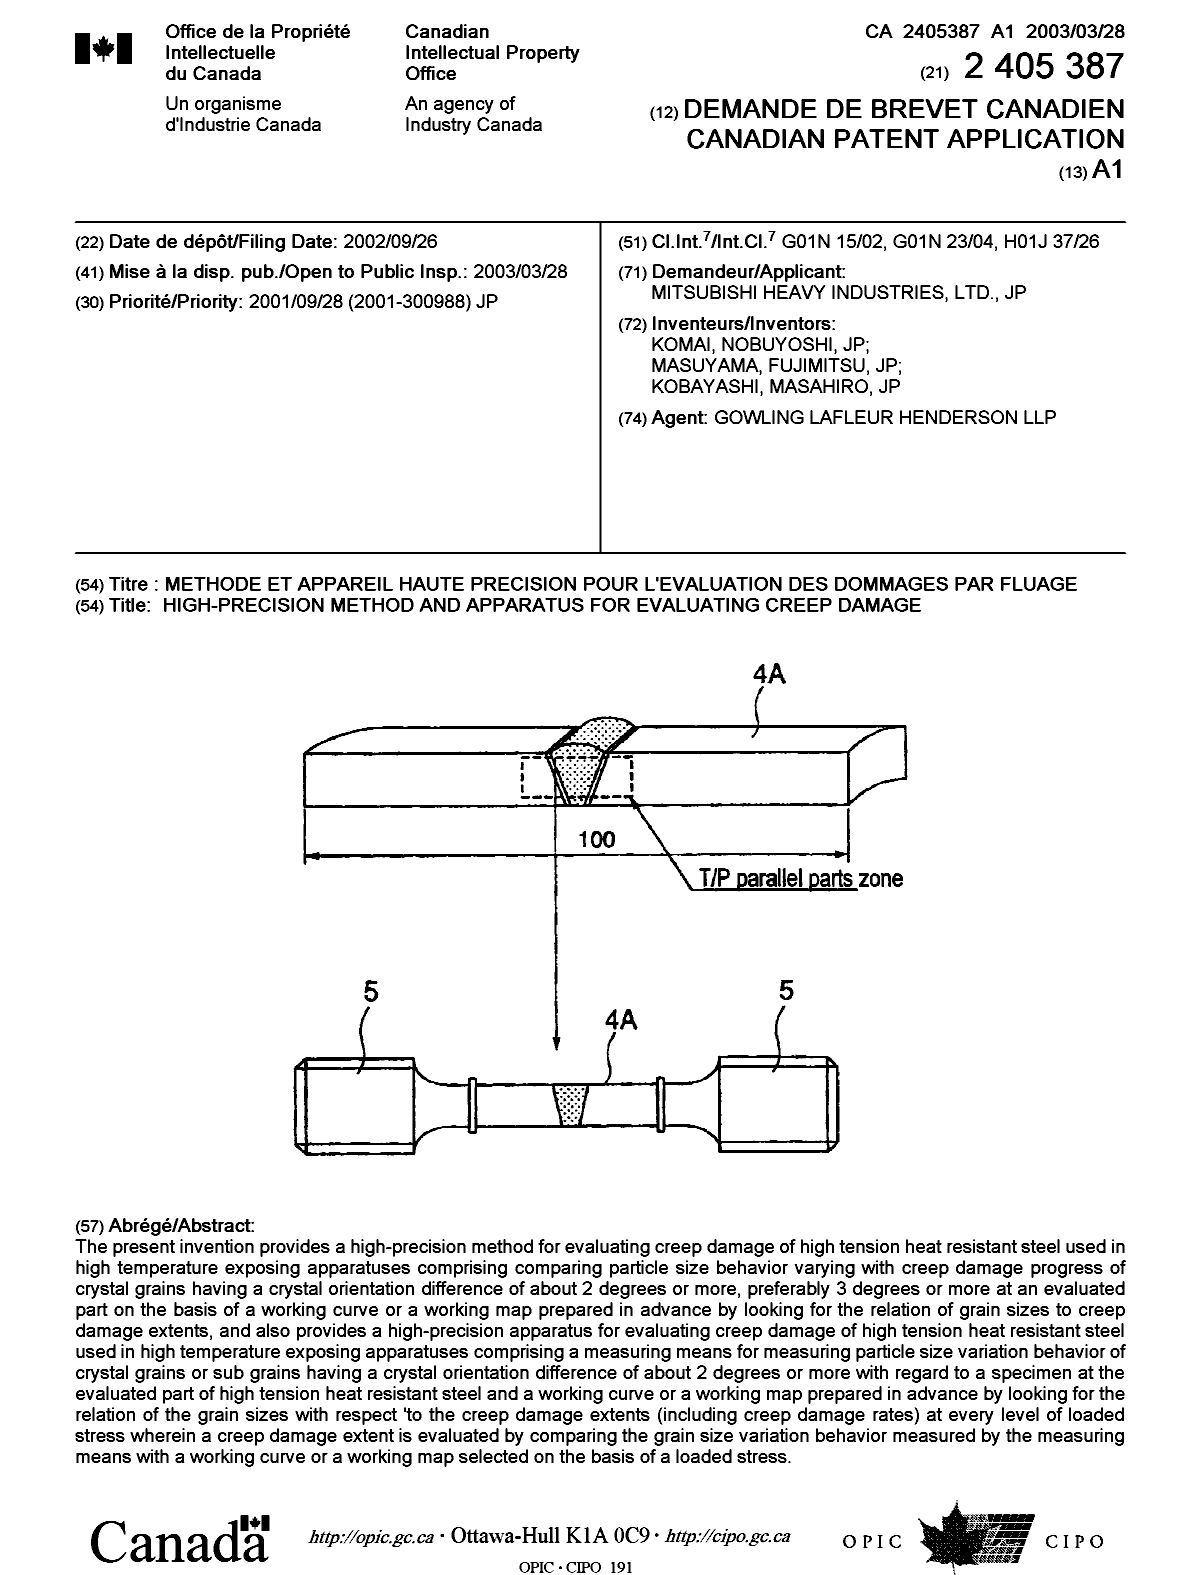 Canadian Patent Document 2405387. Cover Page 20030307. Image 1 of 1